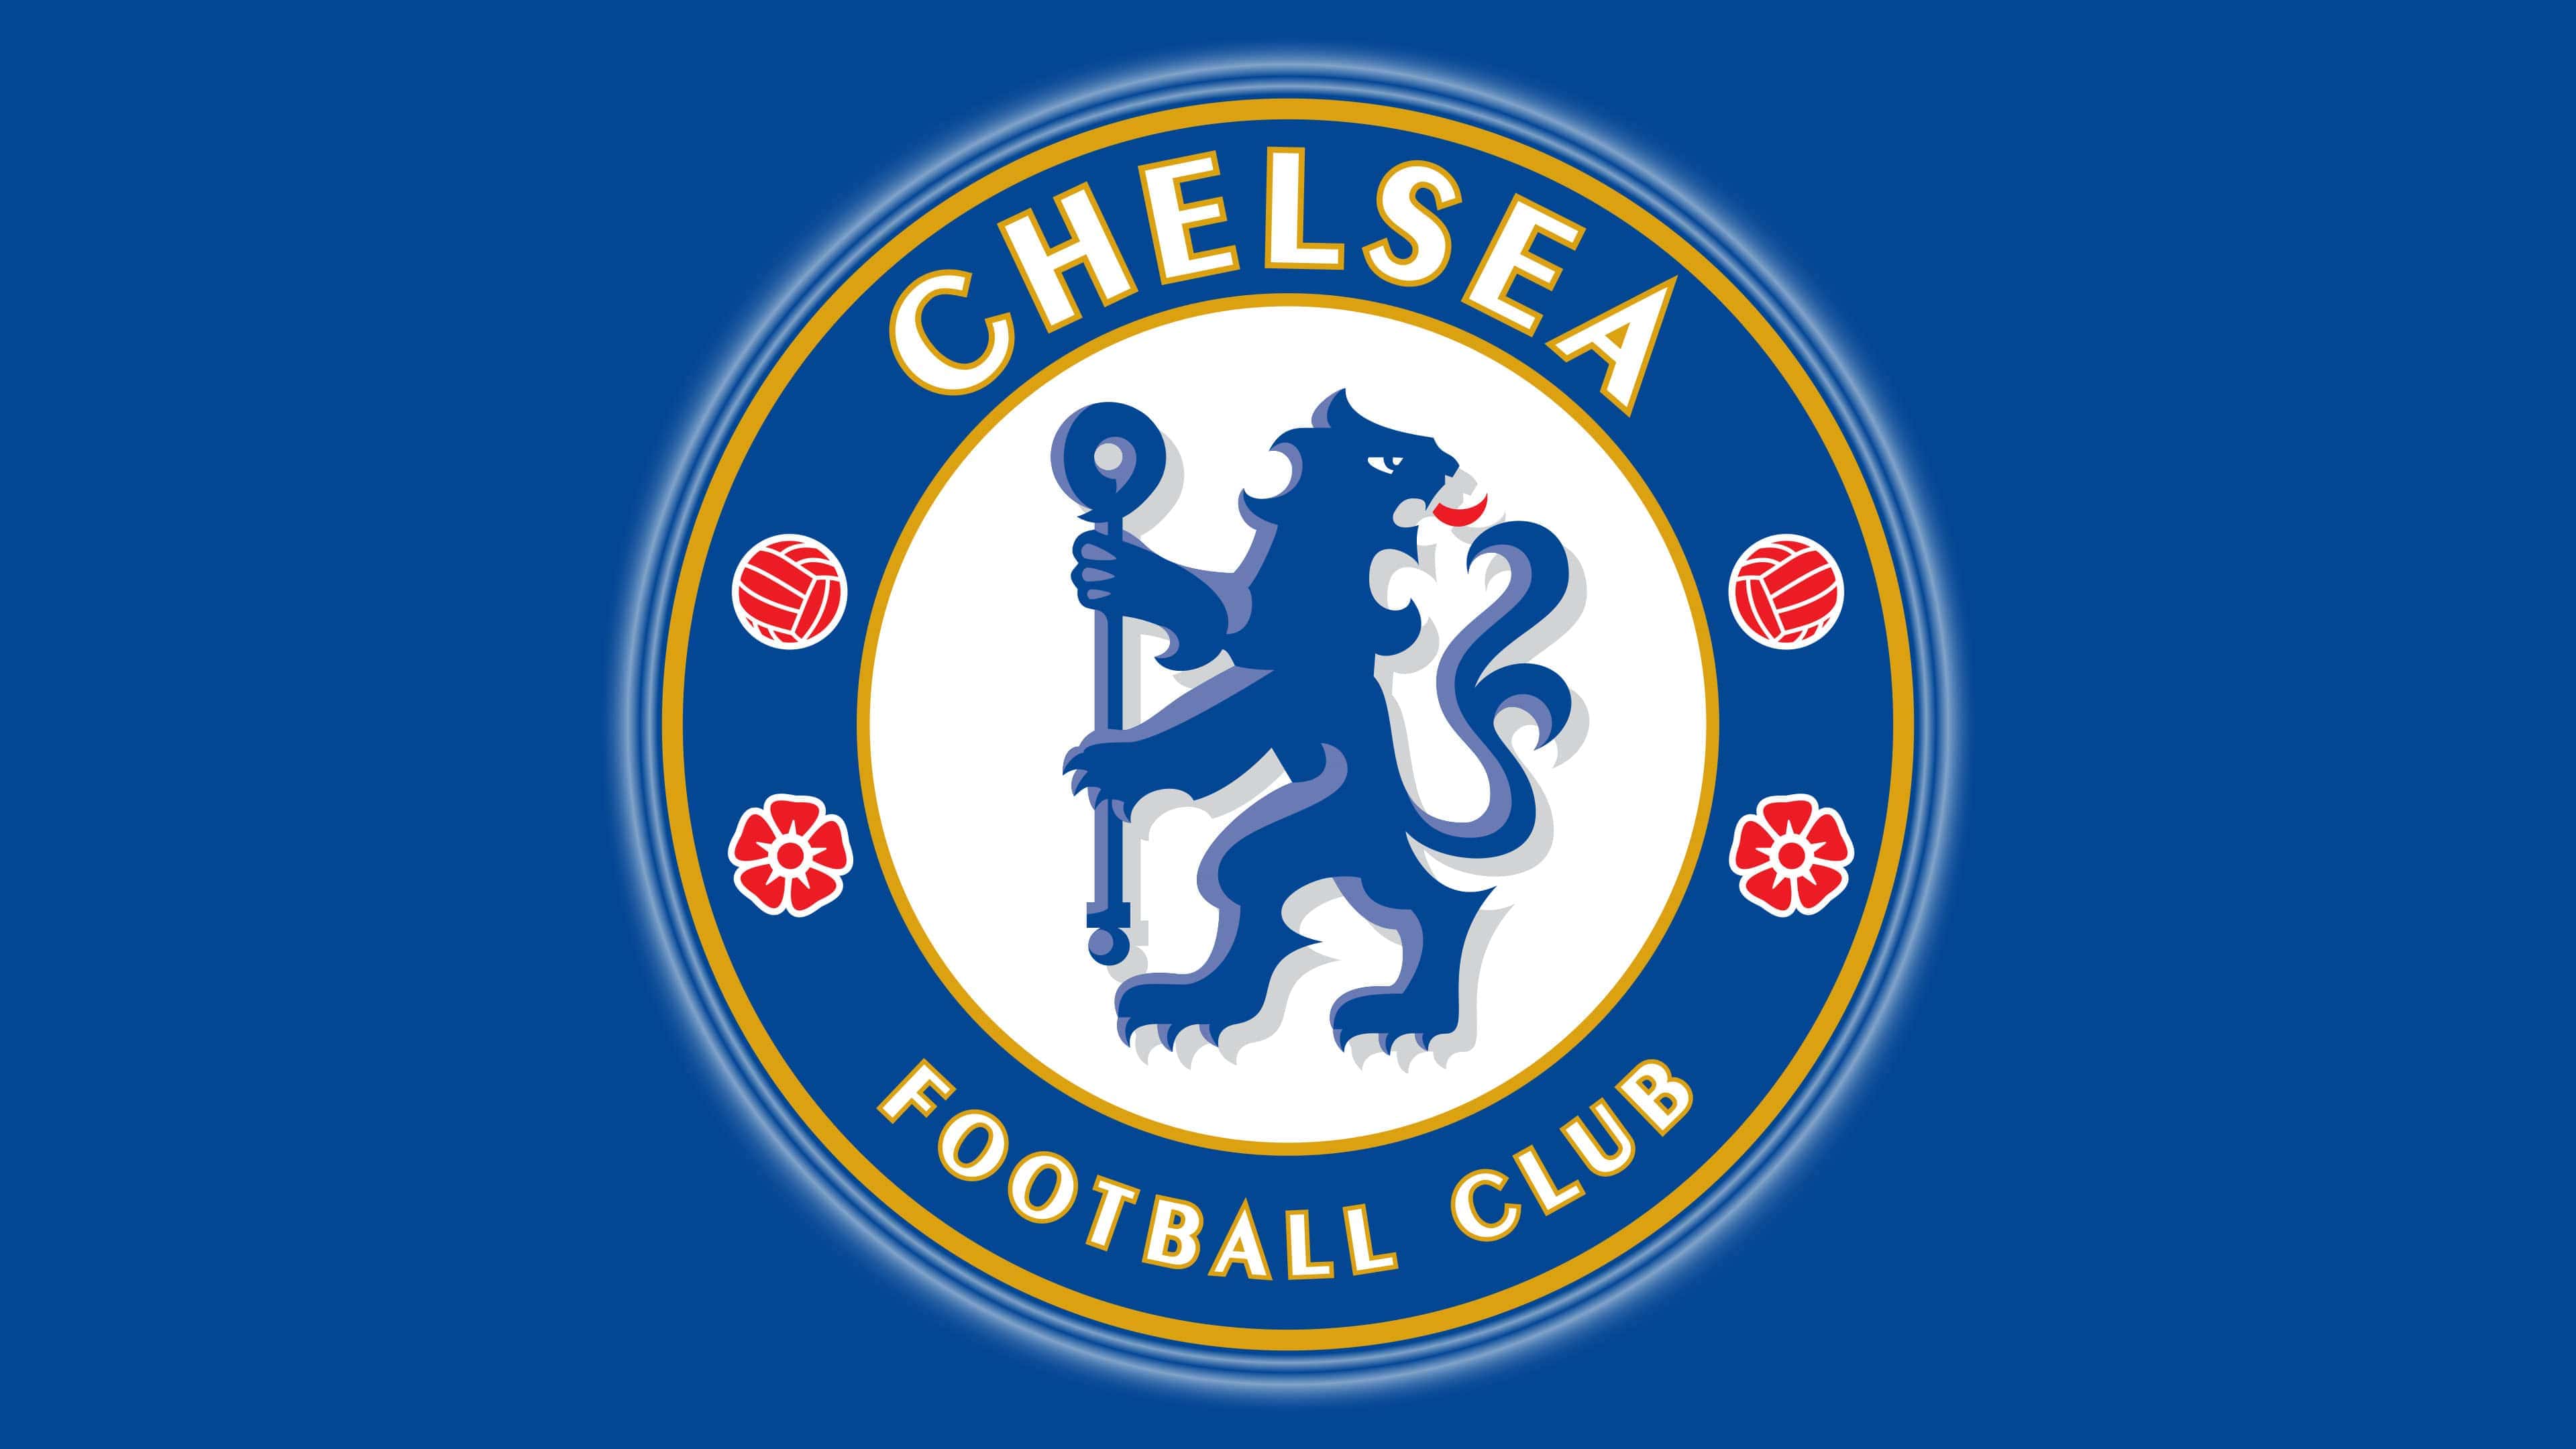 Chelsea Logo The Most Famous Brands And Company Logos In The World